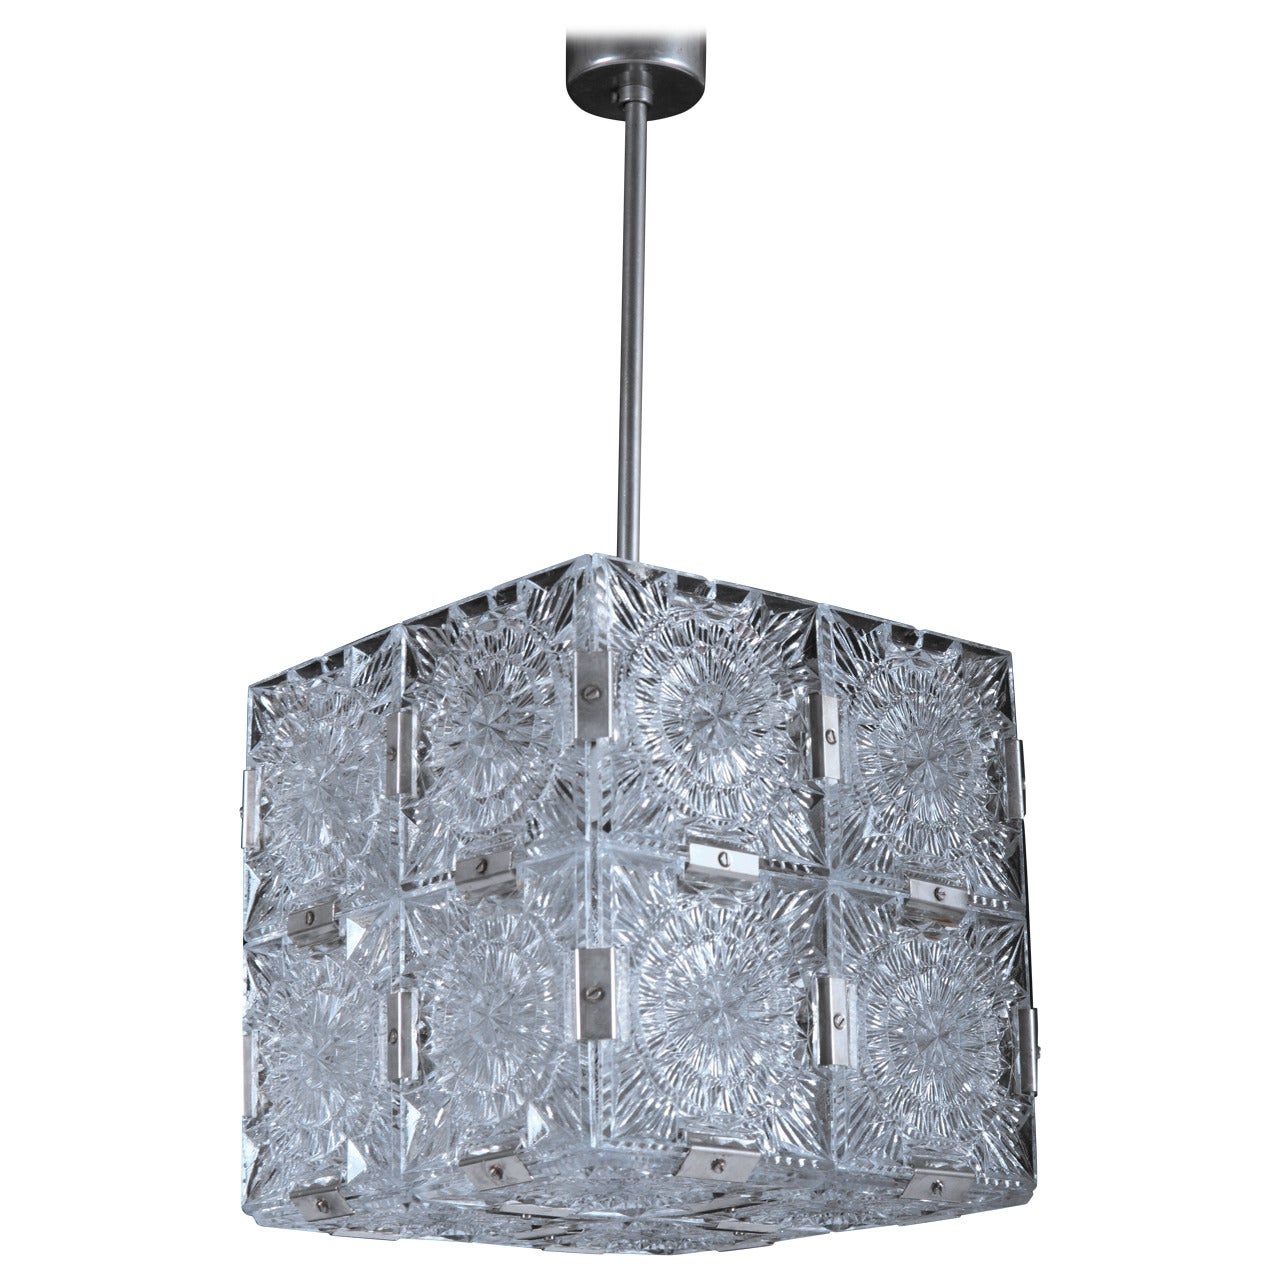 Mid-Century Cube Form Pendant Ceiling Fixture Featuring Etched Glass by Kalmar